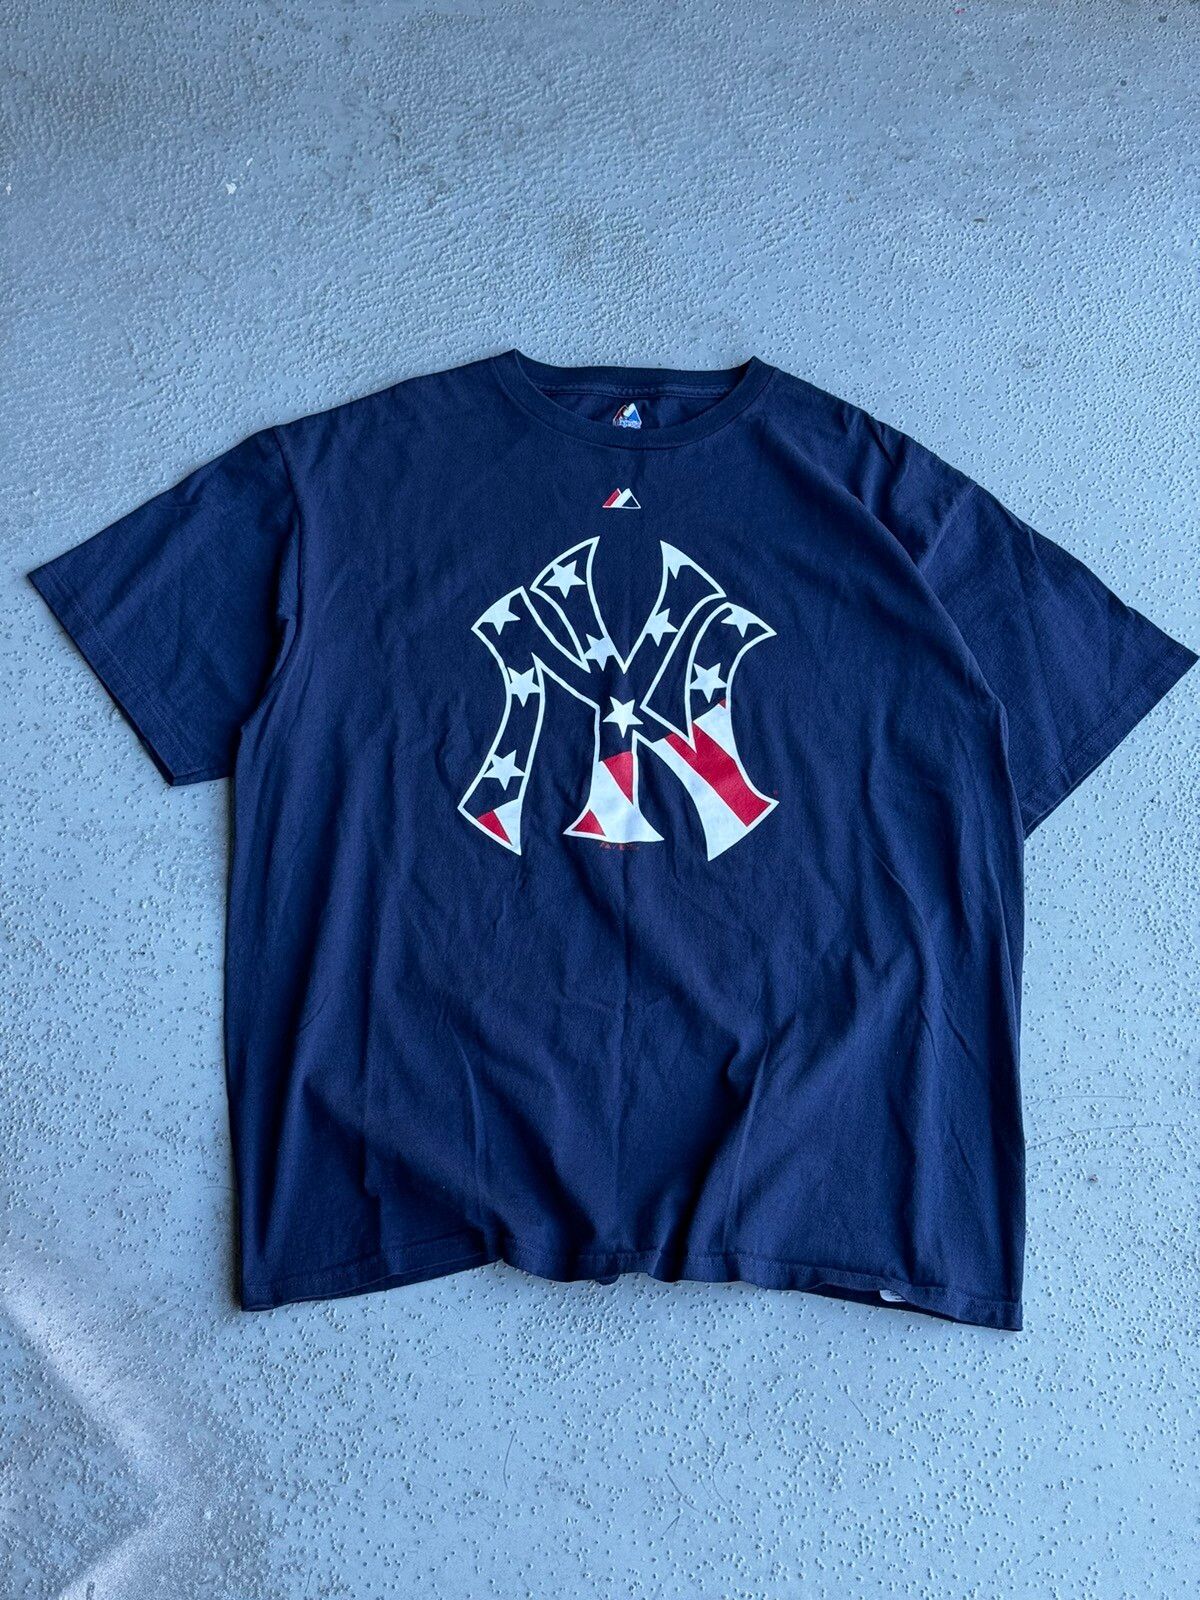 Pre-owned Tee X Vintage Ny Yankees T Shirt Majestic Mlb 2010 In Navy Blue